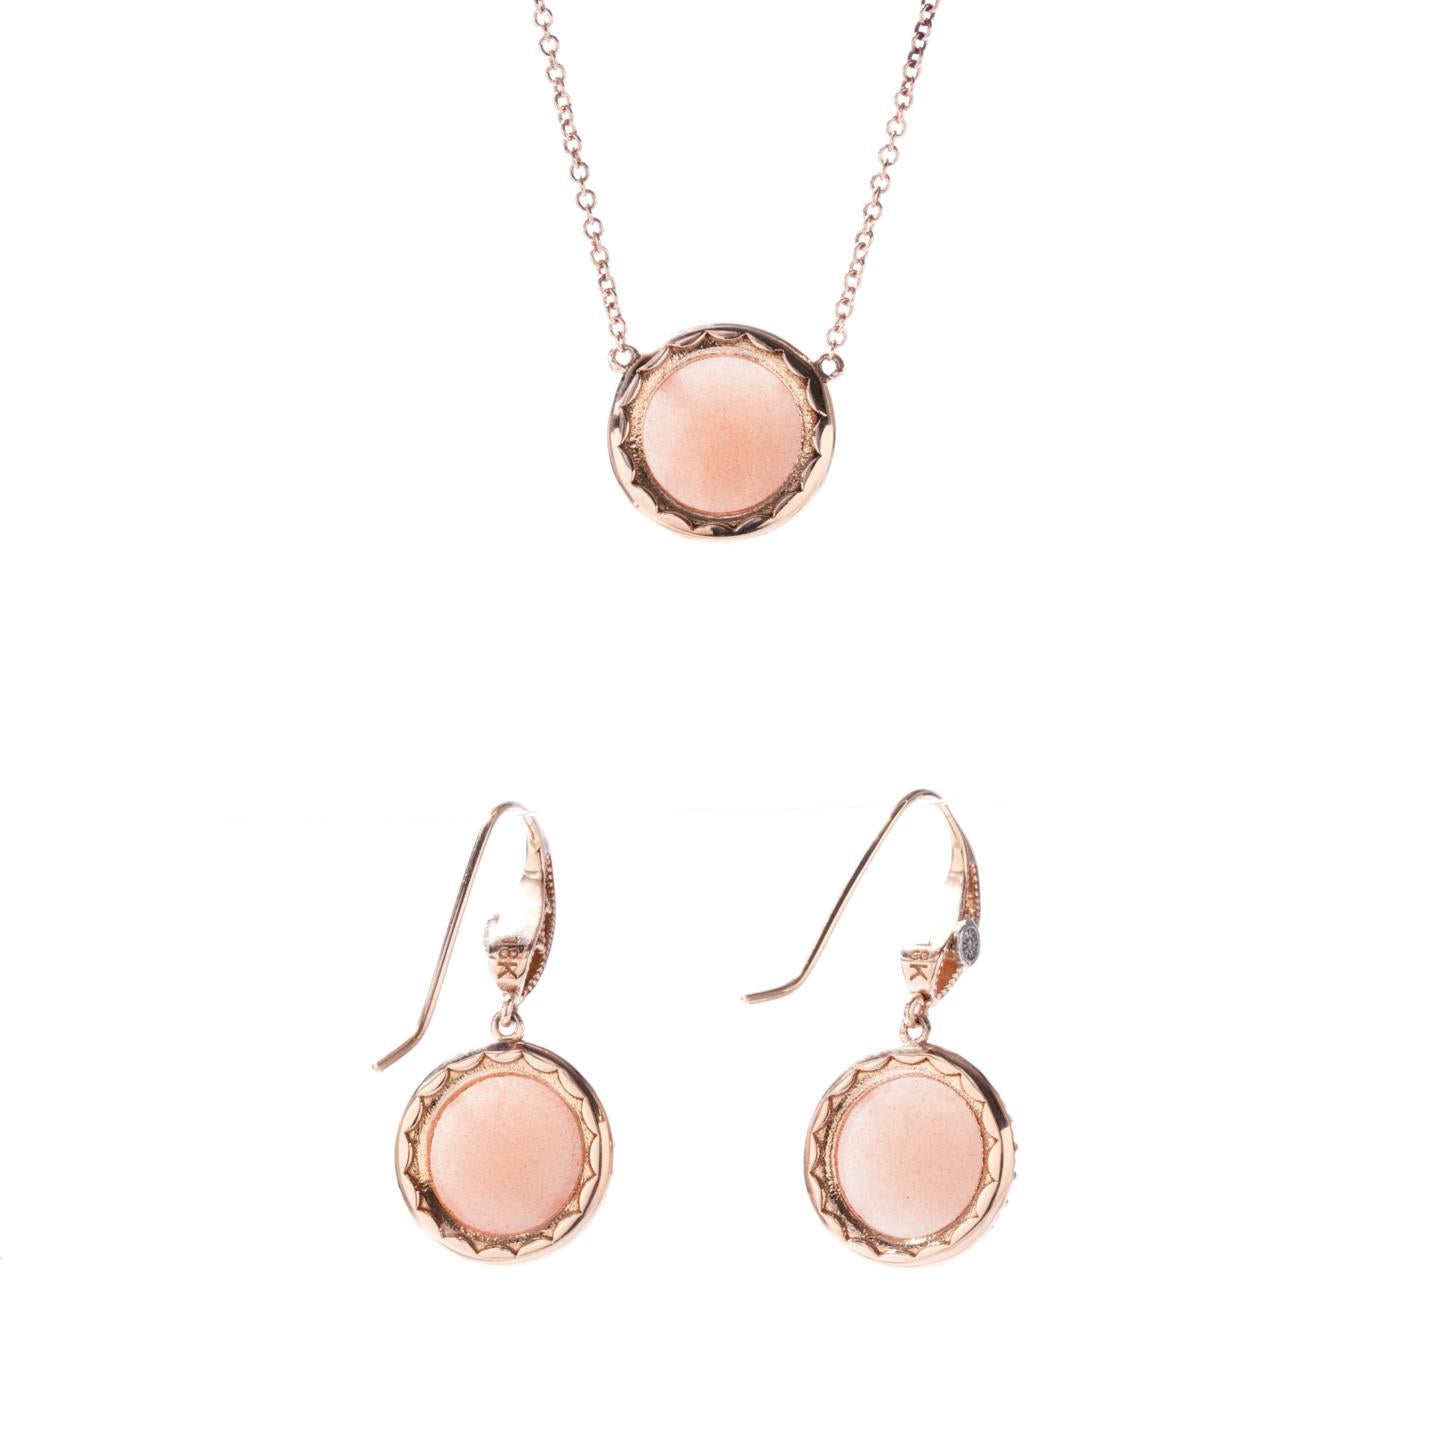 Tacori Necklace and Earrings Set Peach Moonstone Diamonds 18 Karat Rose Gold In New Condition For Sale In Houston, TX